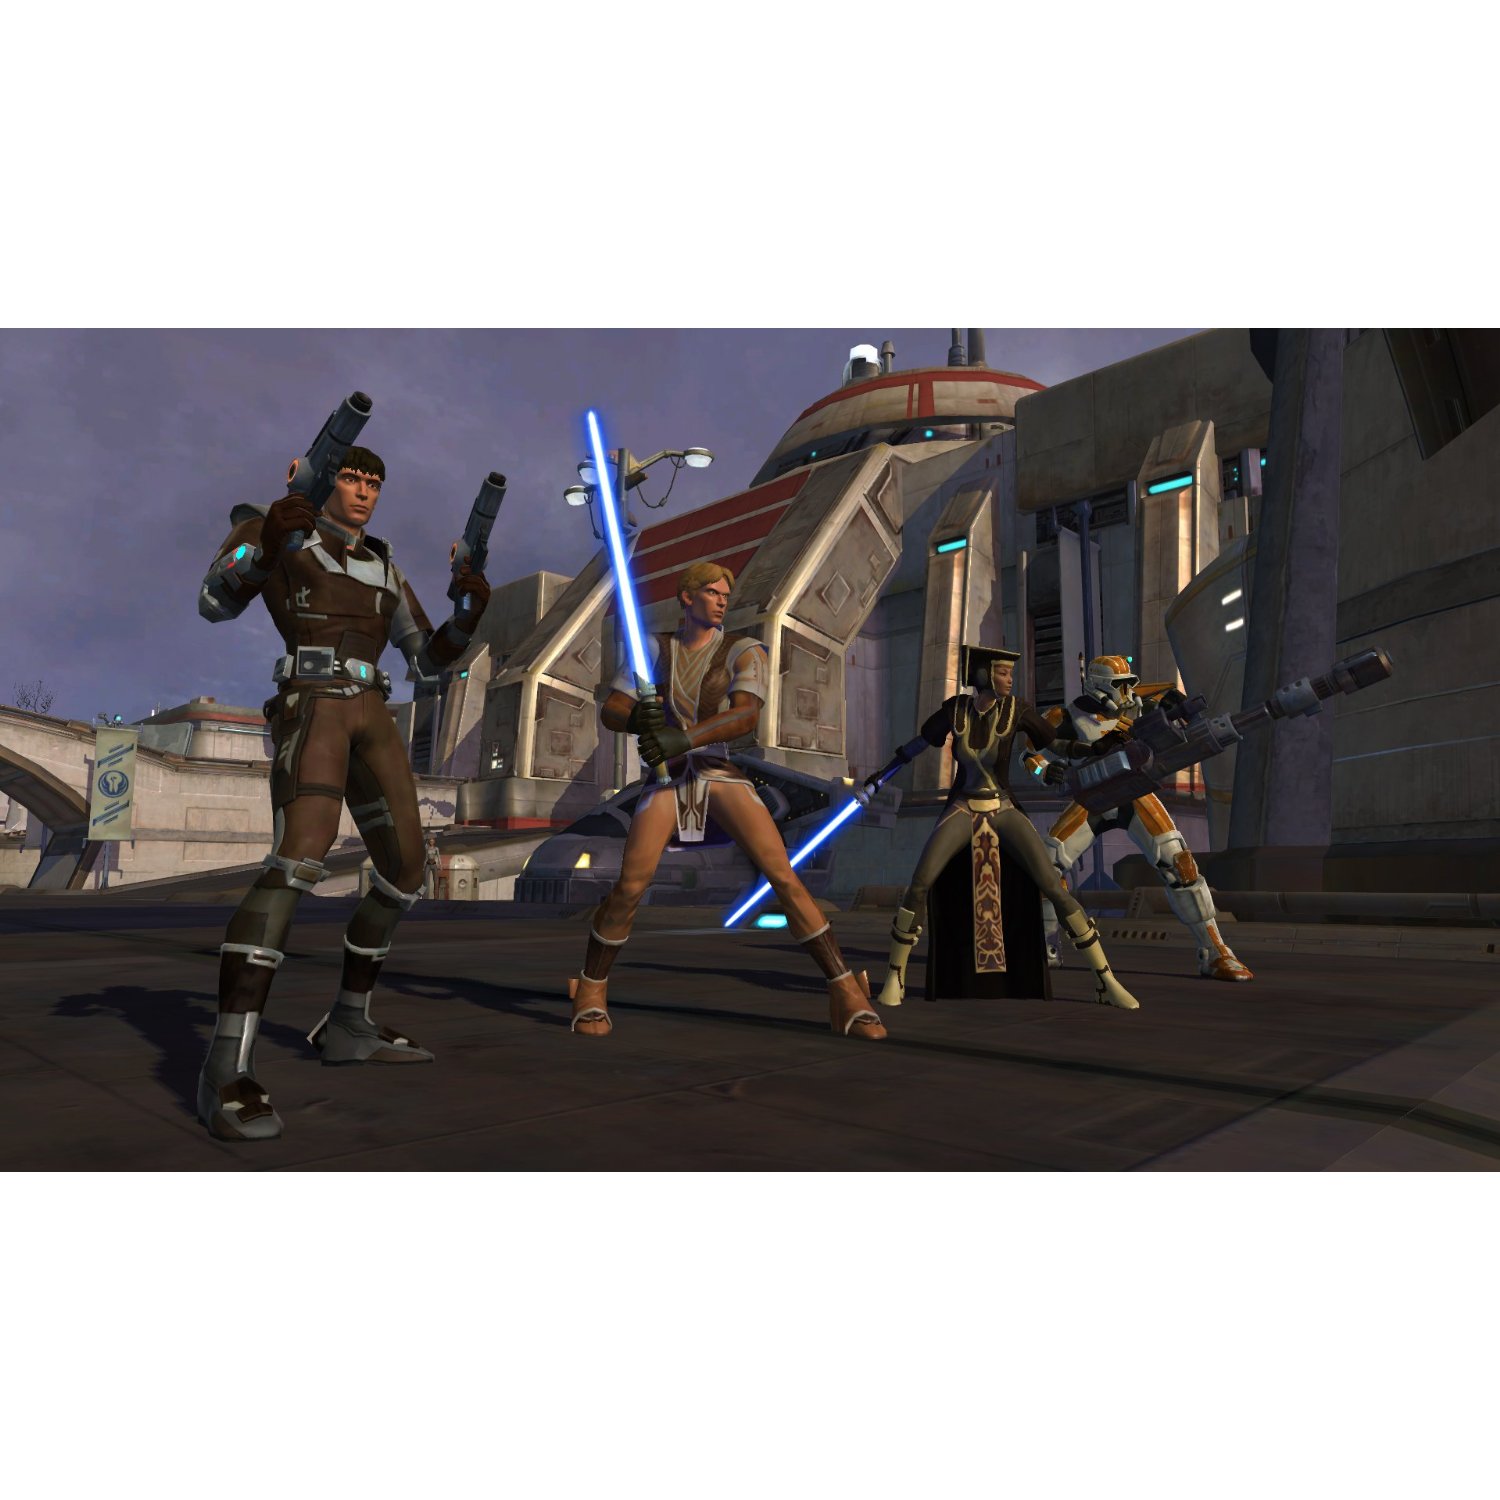 http://thetechjournal.com/wp-content/uploads/images/1107/1312112025-star-wars-the-old-republic--pc-game-available-for-preorder-now-4.jpg